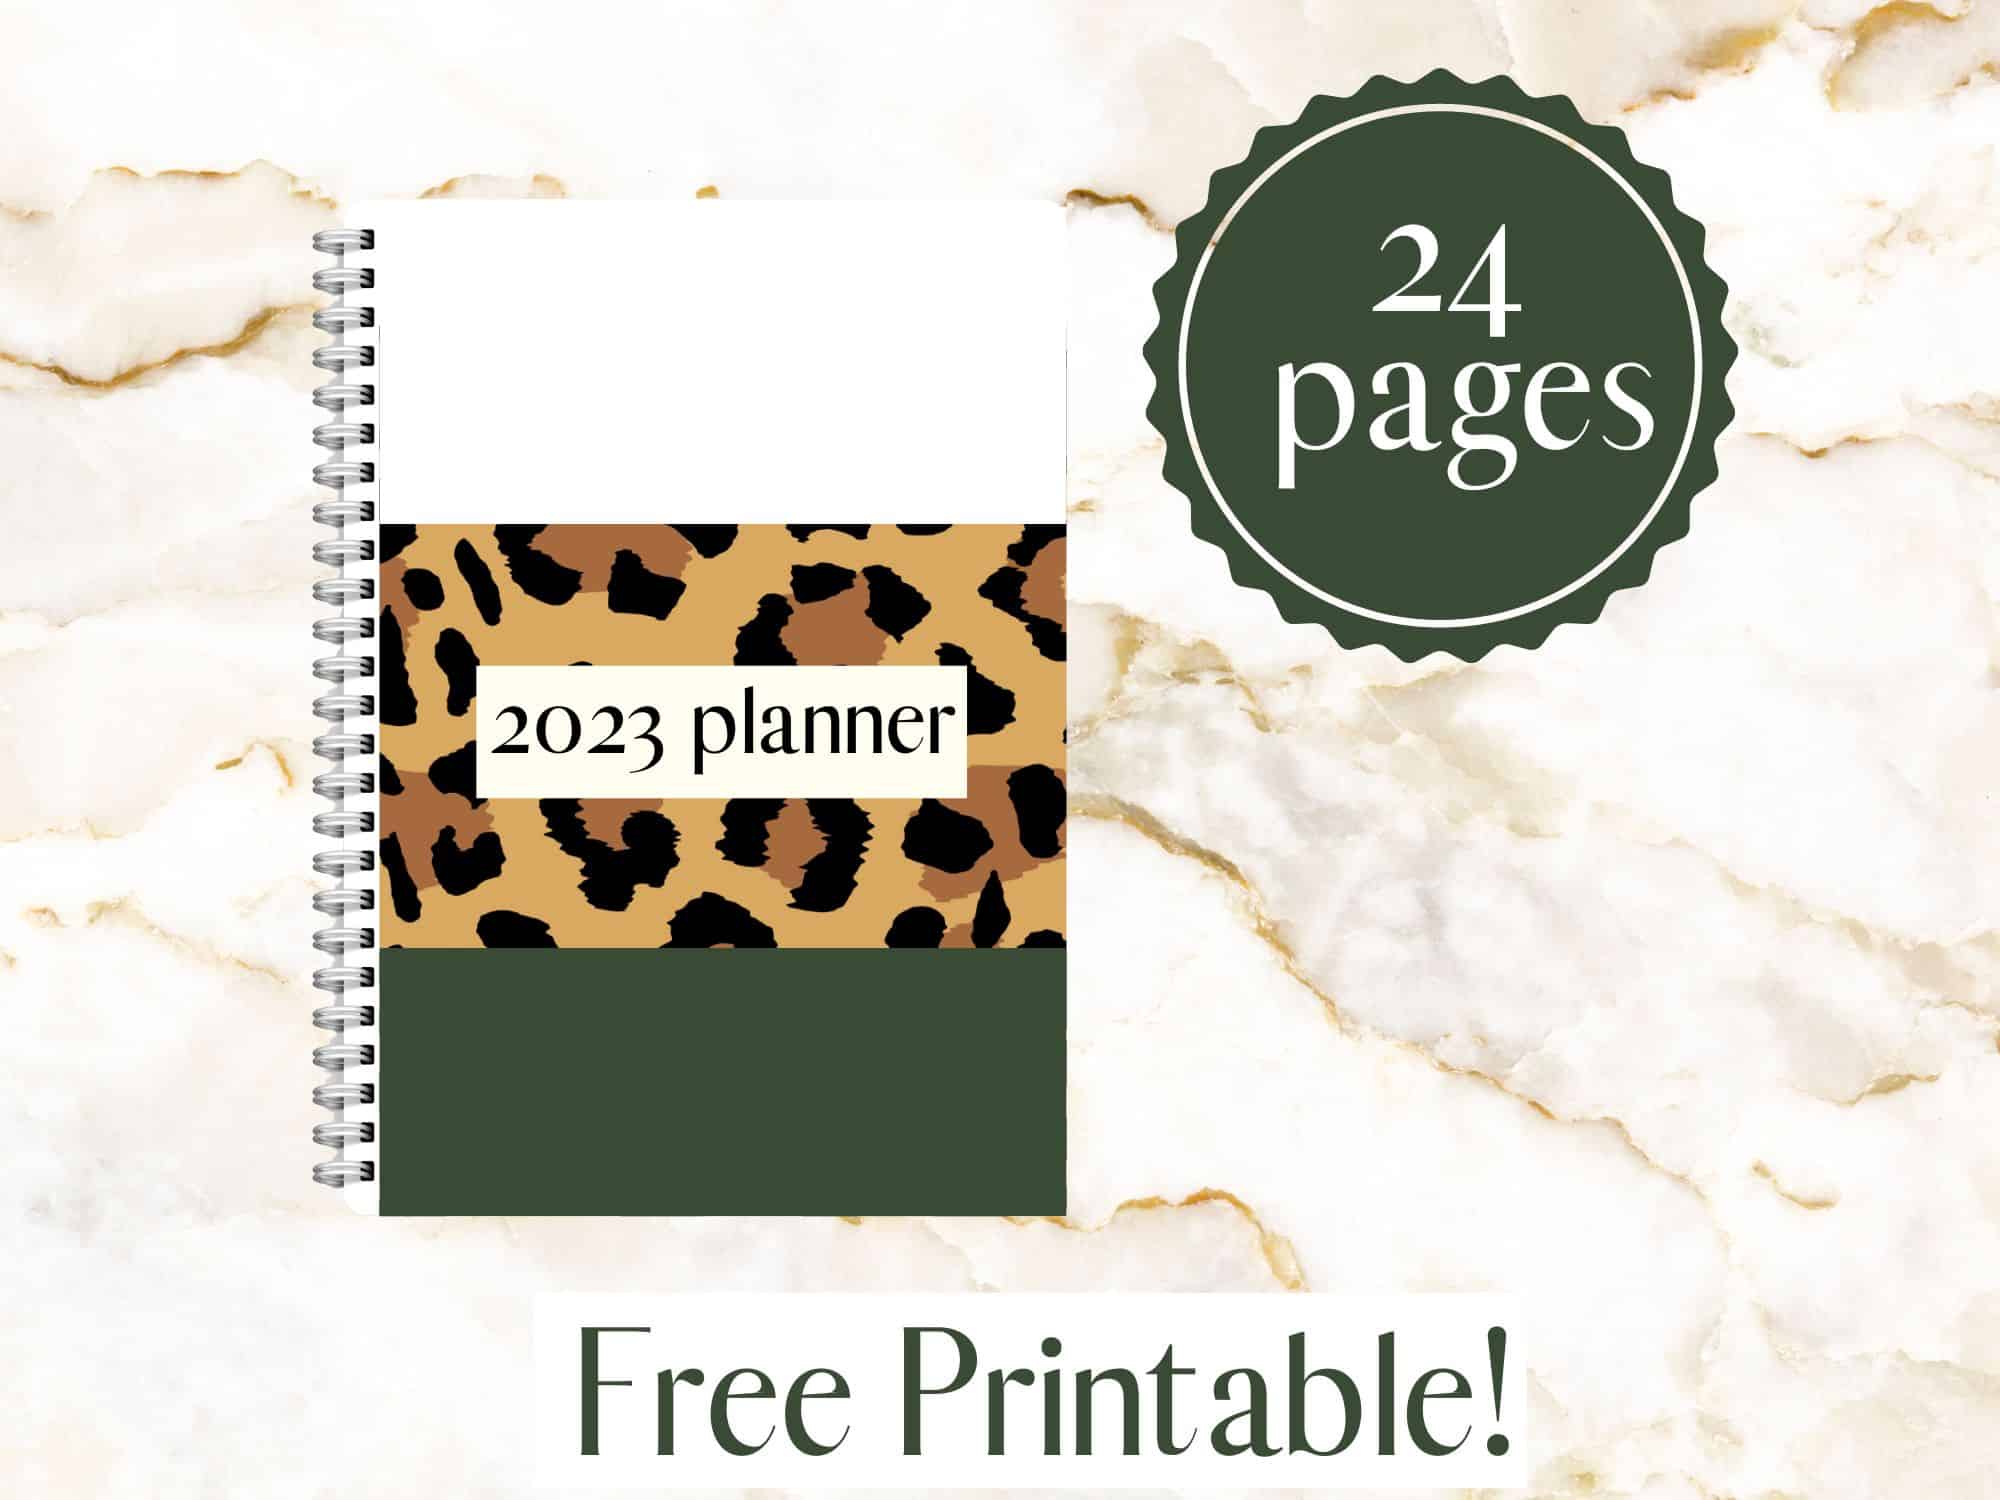 a 2023 planner with text overlay that reads free printable and 24 pages